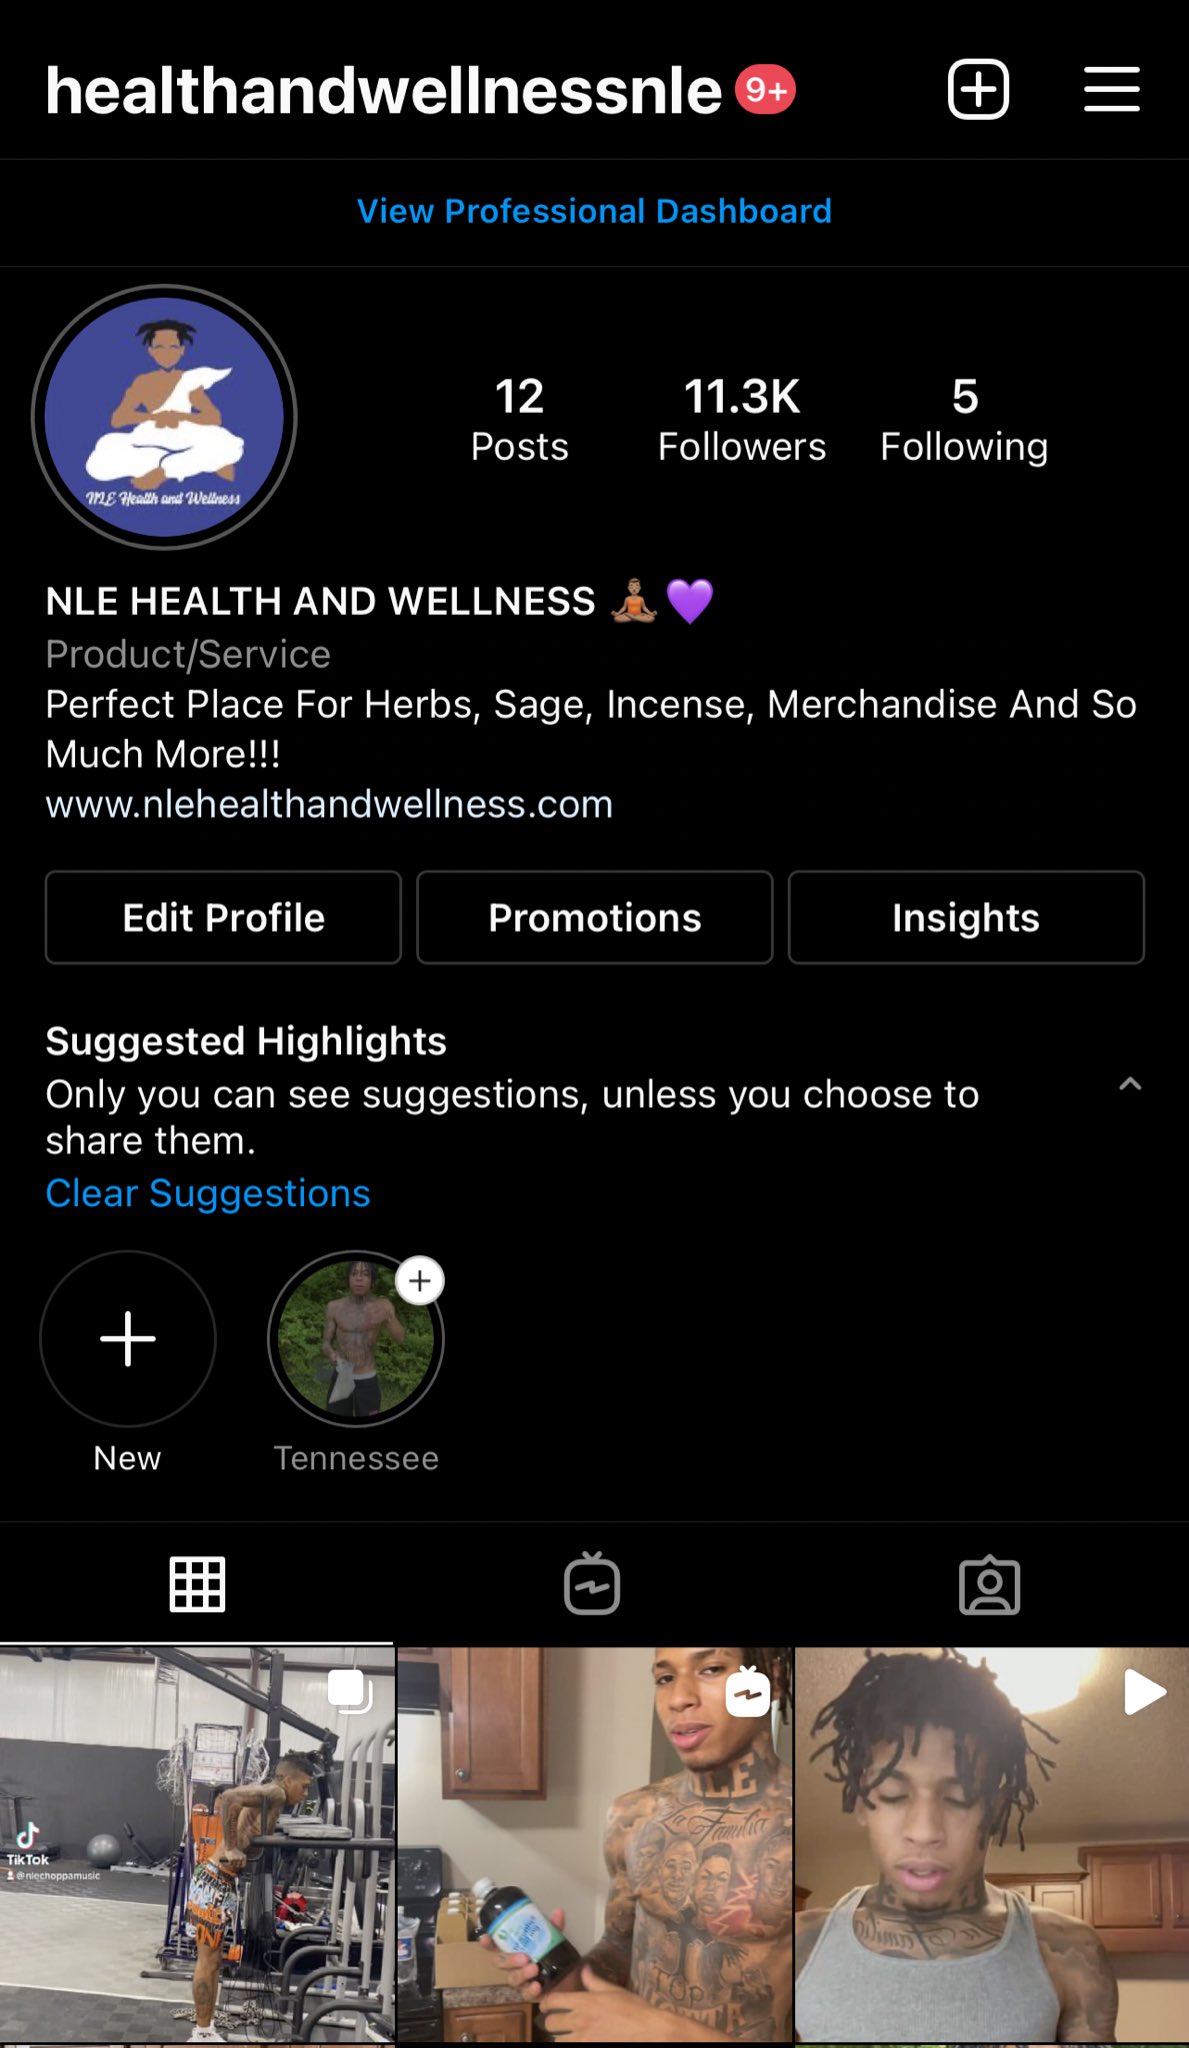 Nle Choppa On Twitter Make Sure To Follow My Health And Wellness Page To Stay Updated On My Herbs Healthandwellnessnle Httpstco9f12vc3svv Twitter